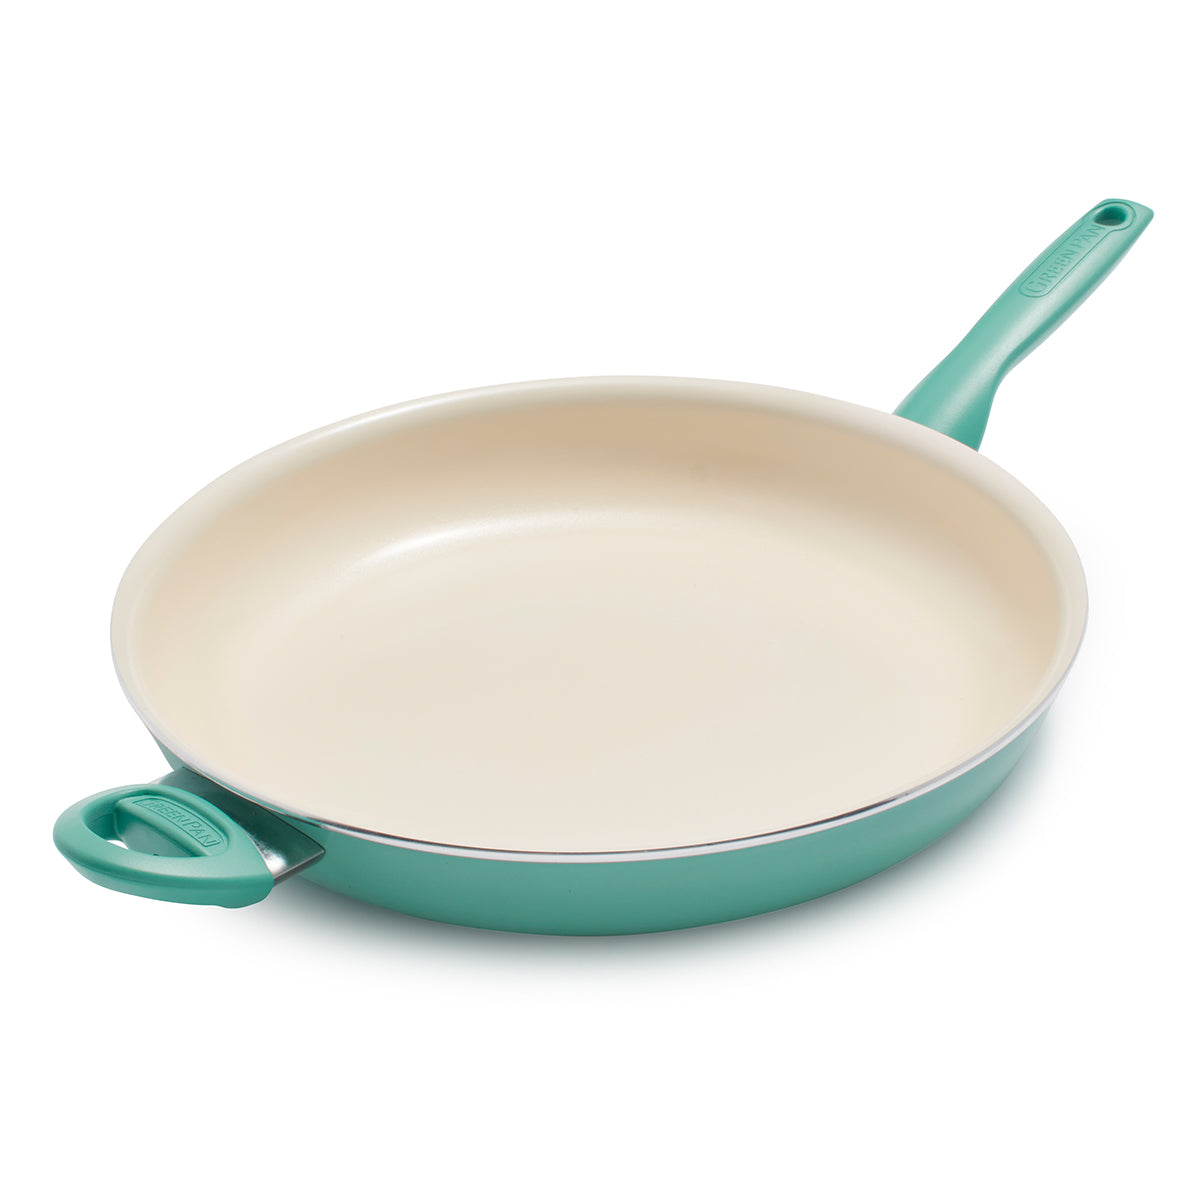 GreenLife 12 Ceramic Non-Stick Open Frypan Turquoise